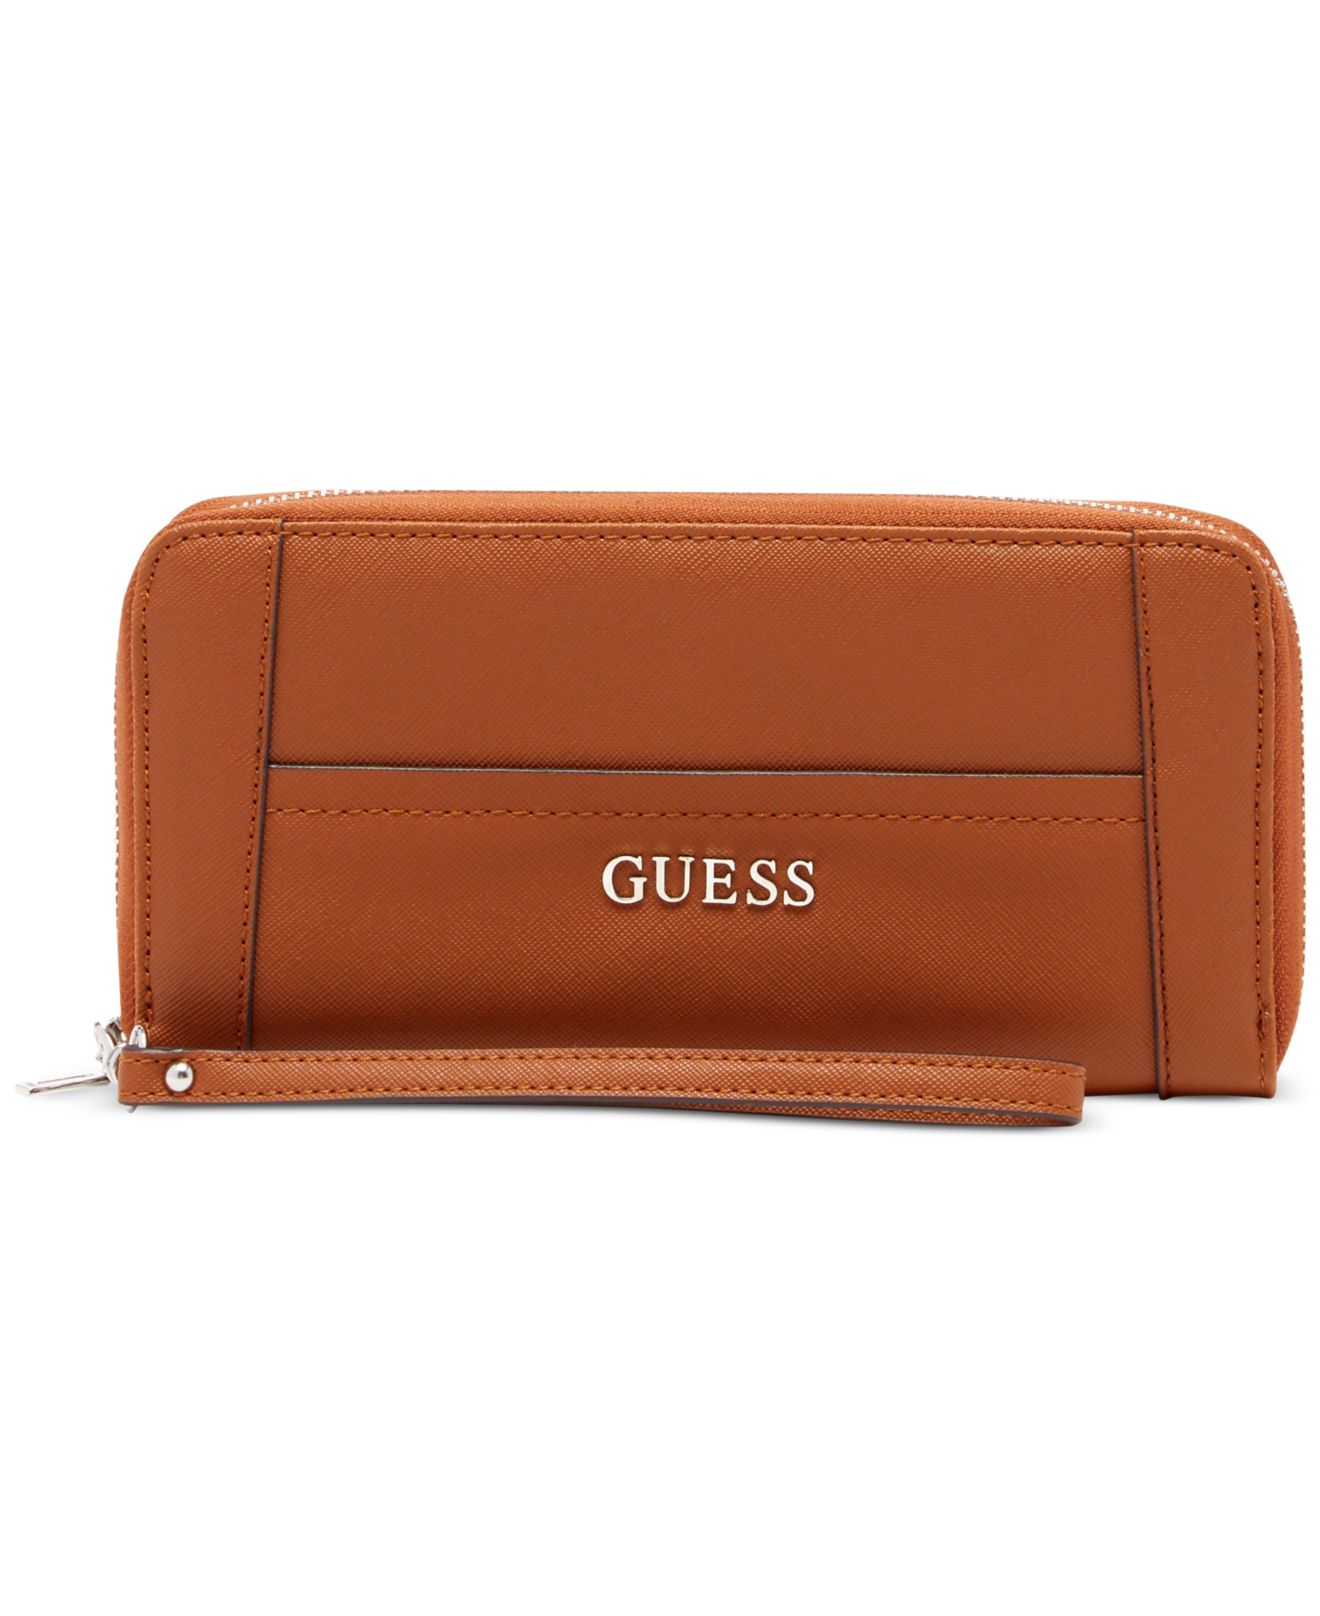 Guess Delaney Large Zip Around Wallet in Brown | Lyst